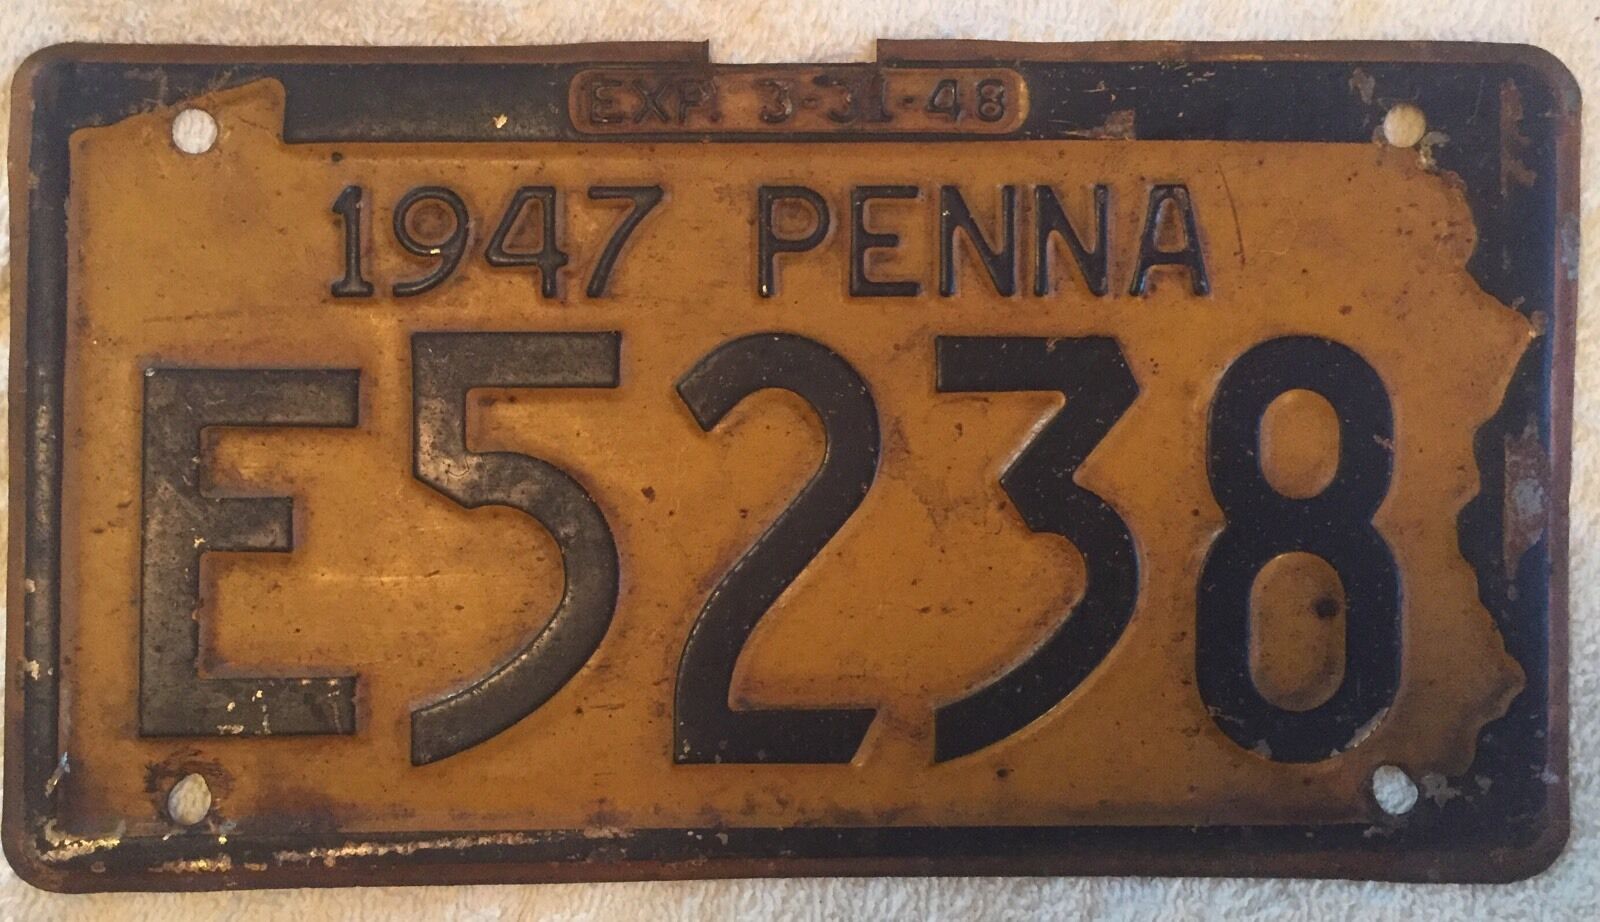 VINTAGE ORIGINAL 1947 PENNSYLVANIA LICENSE PLATE  See My Other Plates